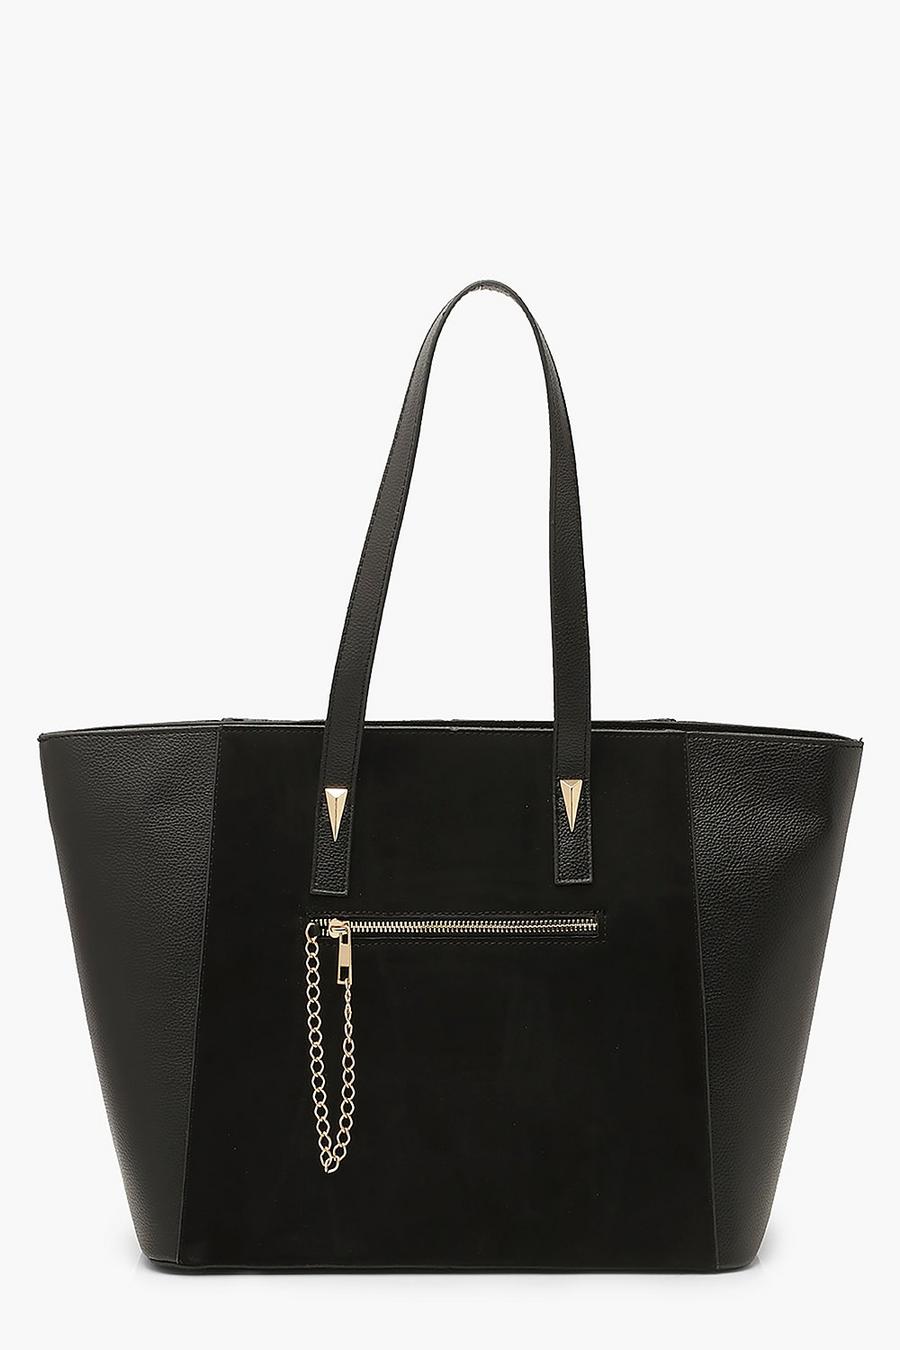 Black Suedette & PU Tote Bag With Chain Trim Detail image number 1